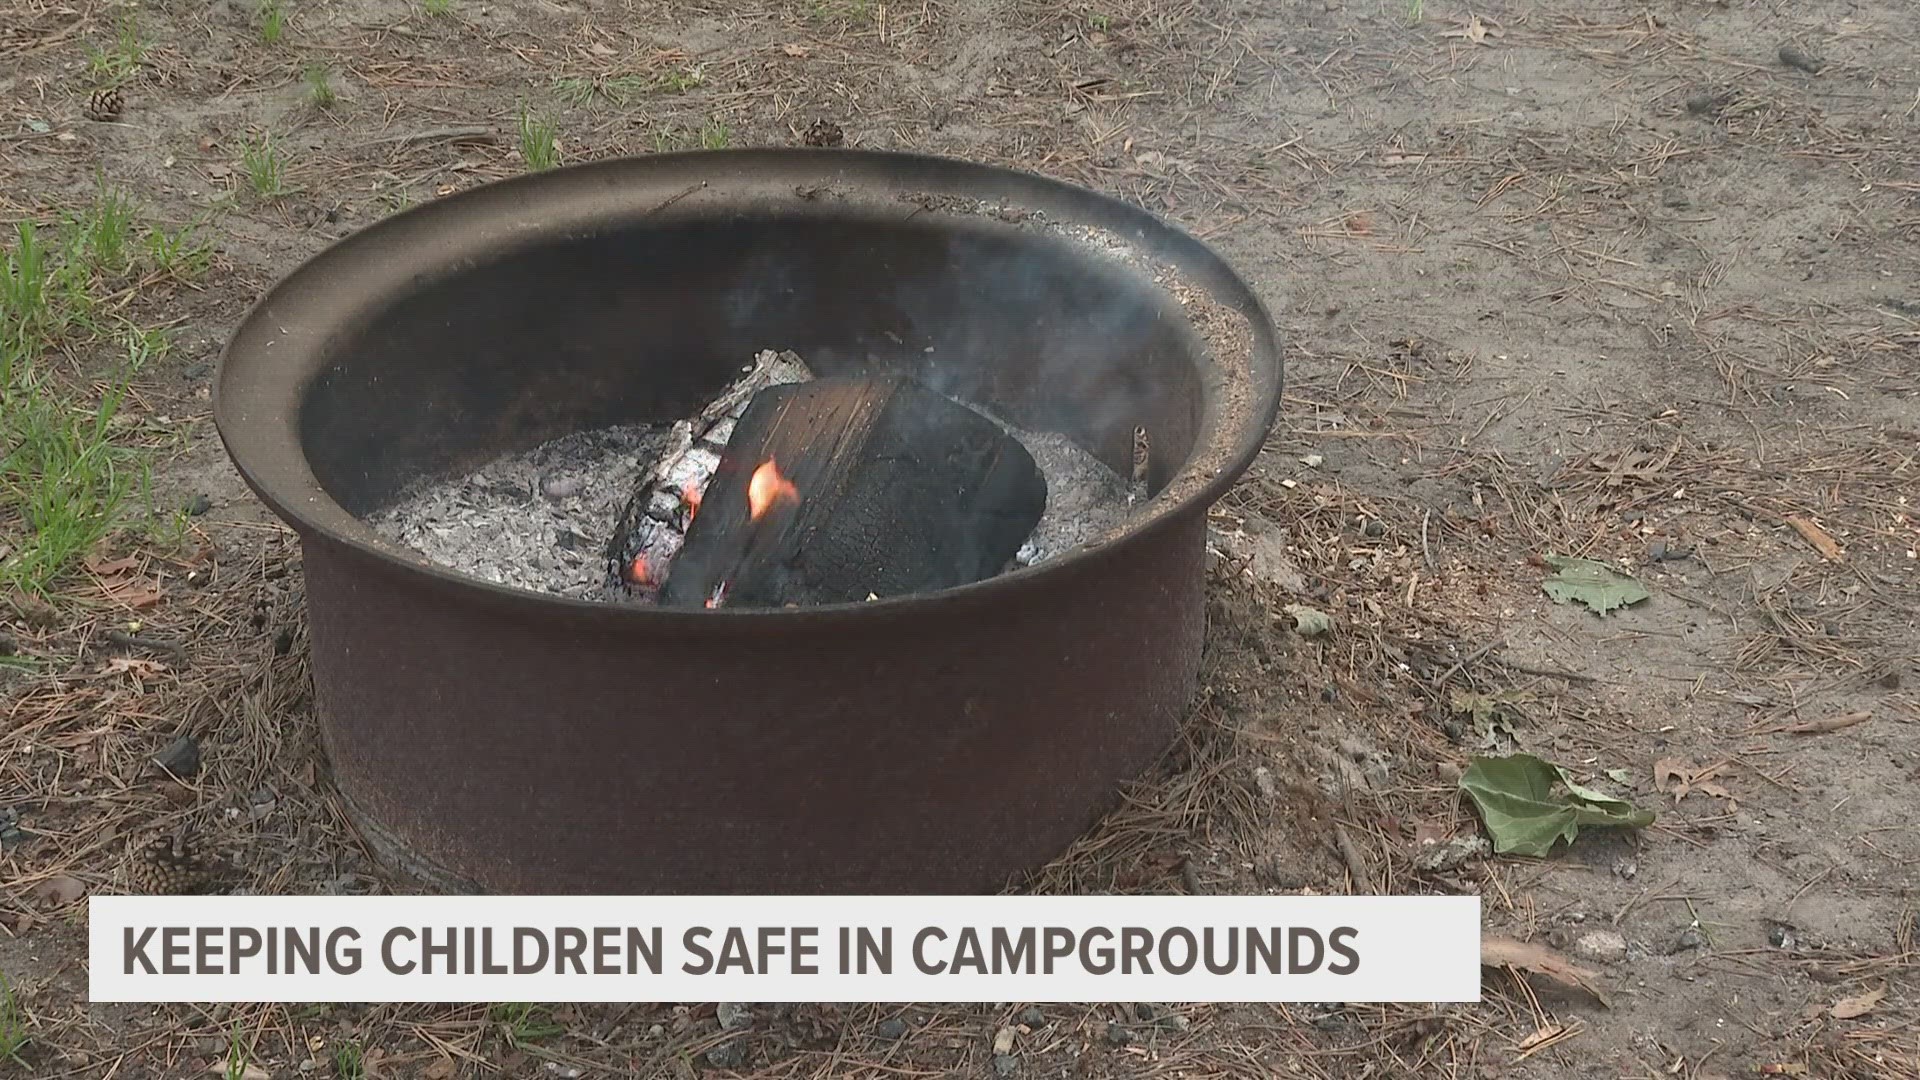 Michigan DNR shares some safety tips for you and your family.